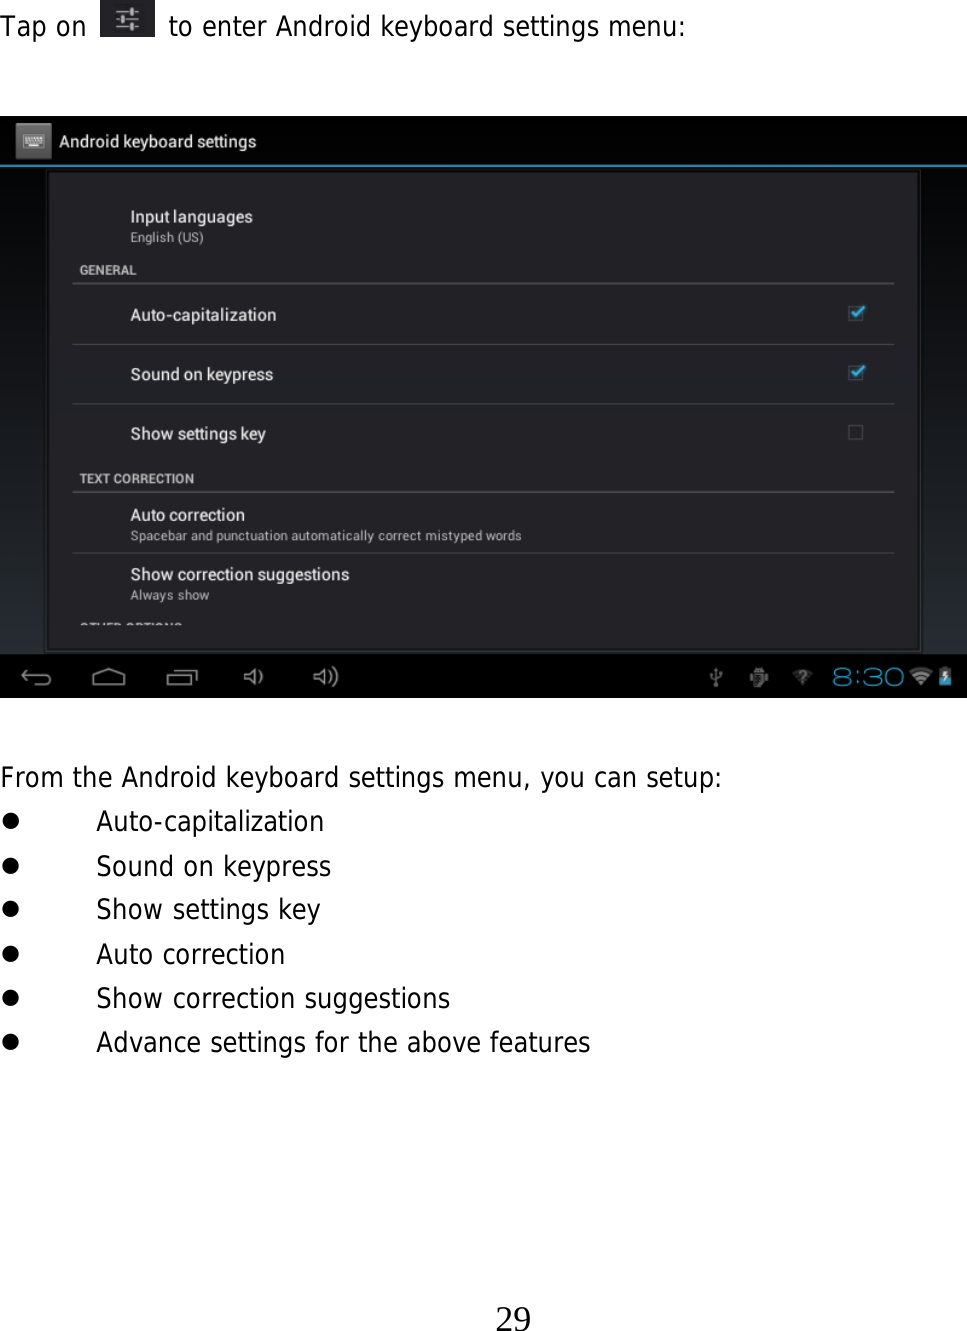   29  Tap on   to enter Android keyboard settings menu:                 From the Android keyboard settings menu, you can setup:  Auto-capitalization  Sound on keypress  Show settings key  Auto correction  Show correction suggestions  Advance settings for the above features     